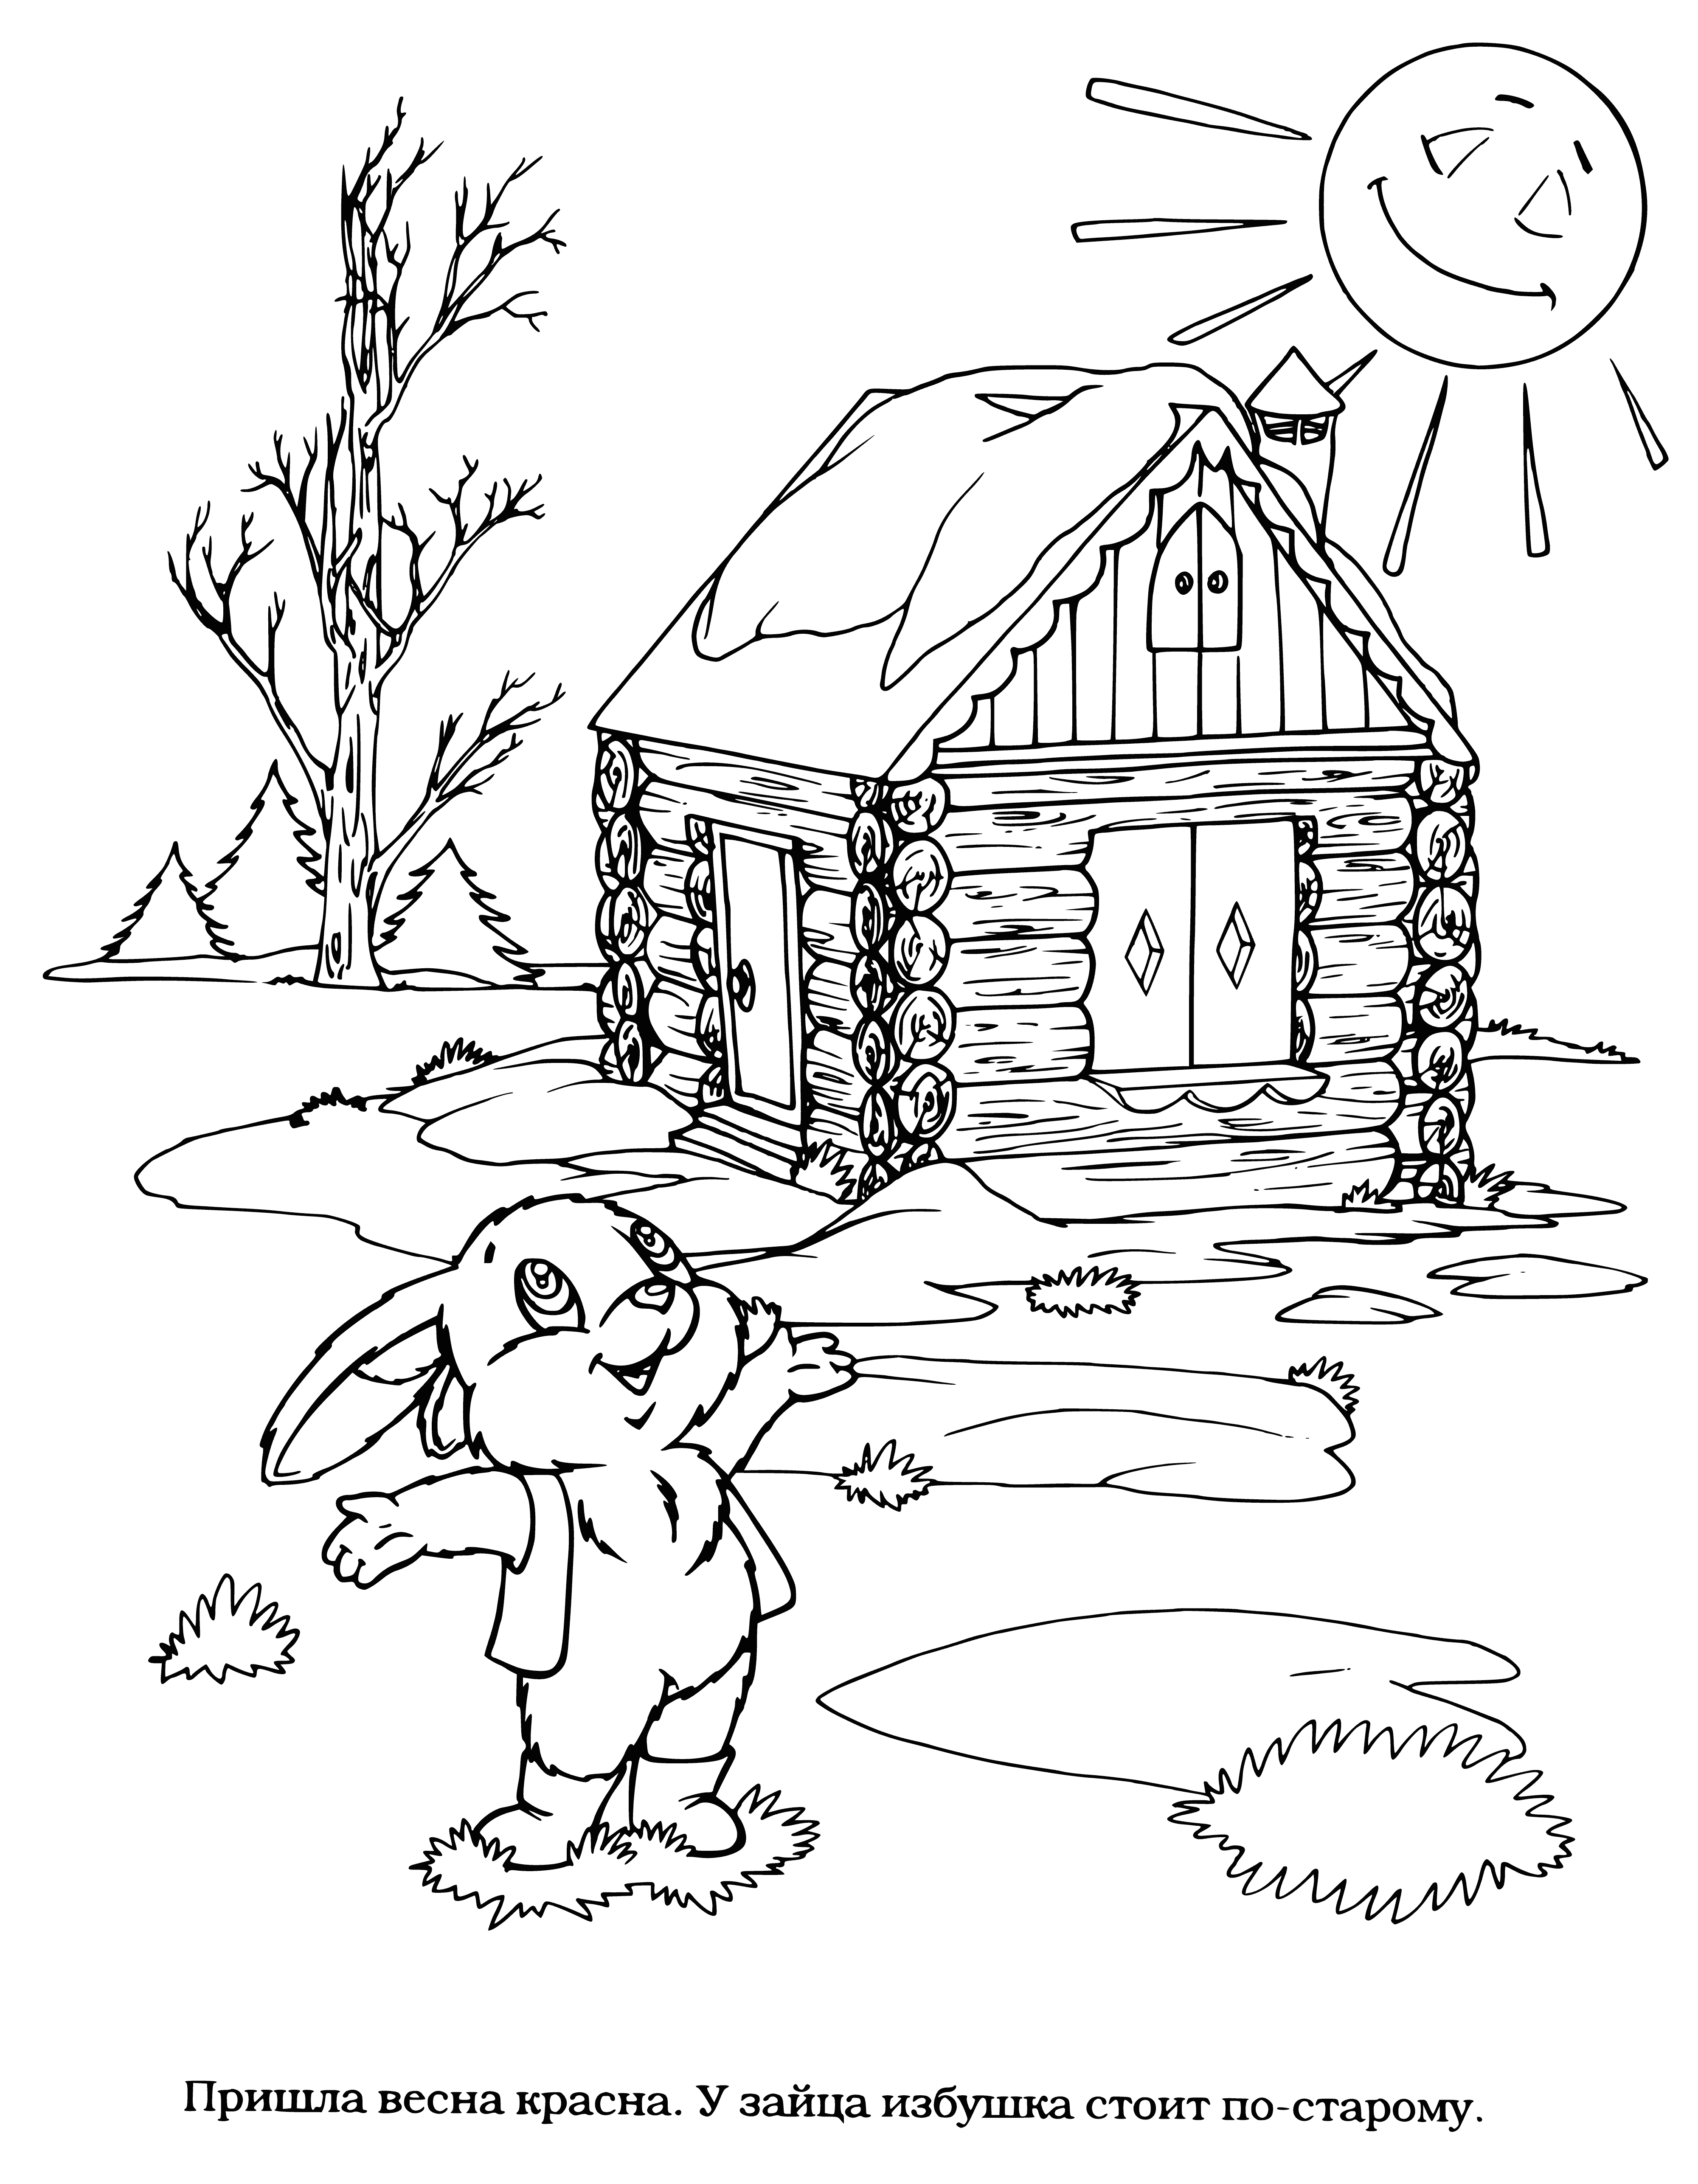 Hare hut coloring page